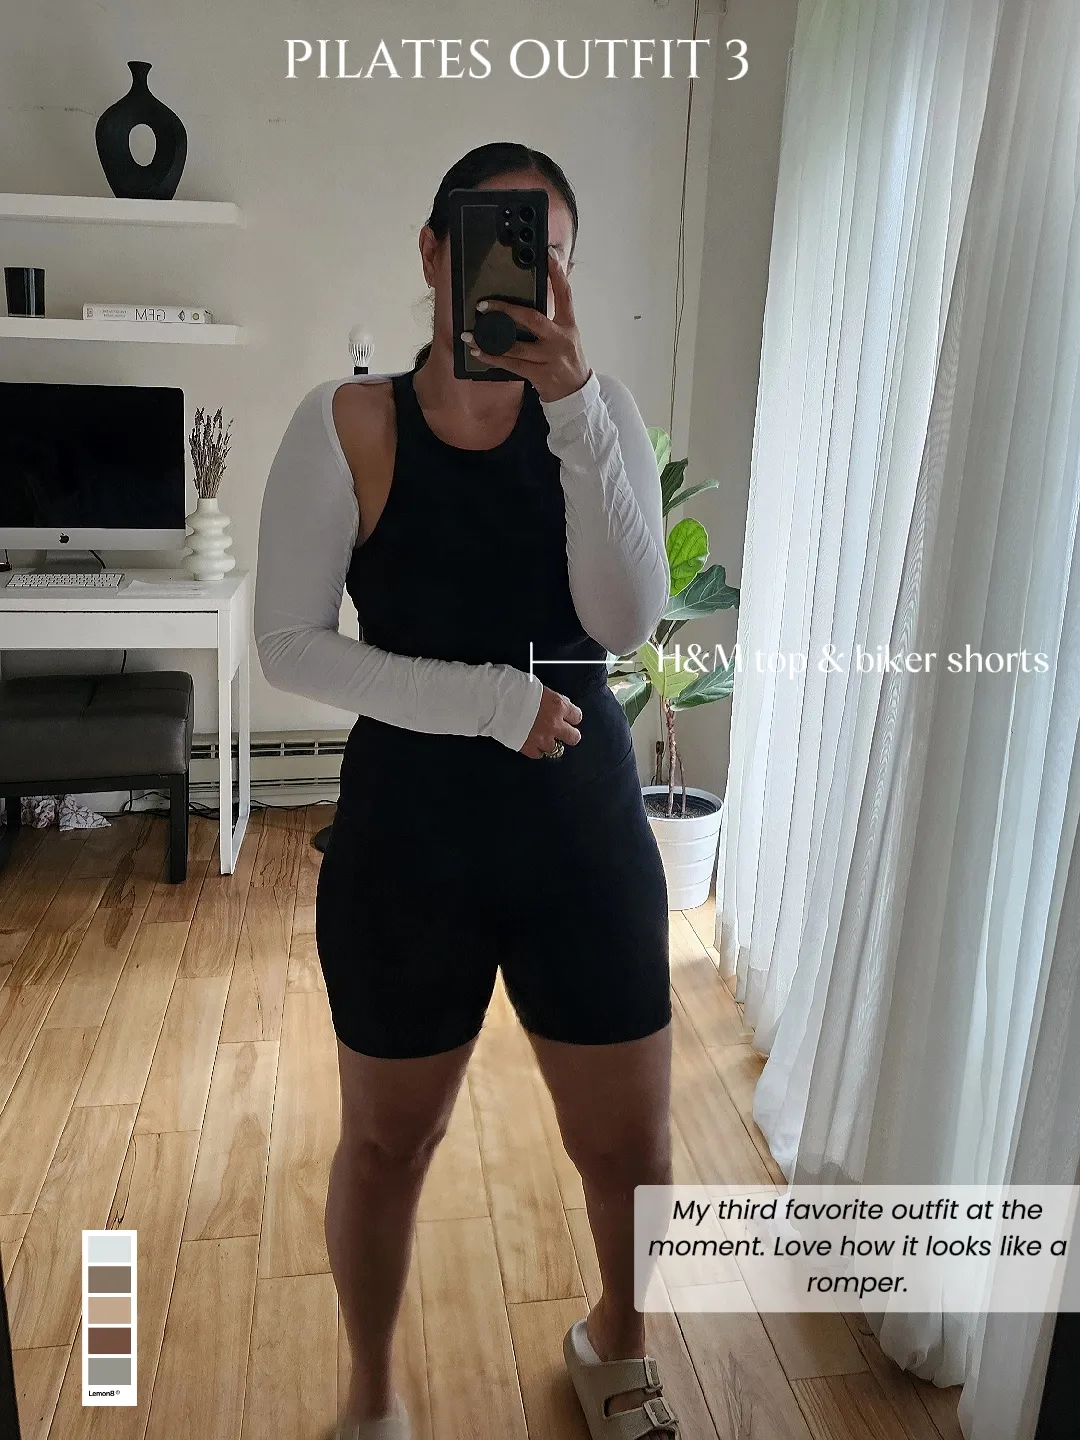 New one piece Pilates outfit😊31F : r/JustNiceFits